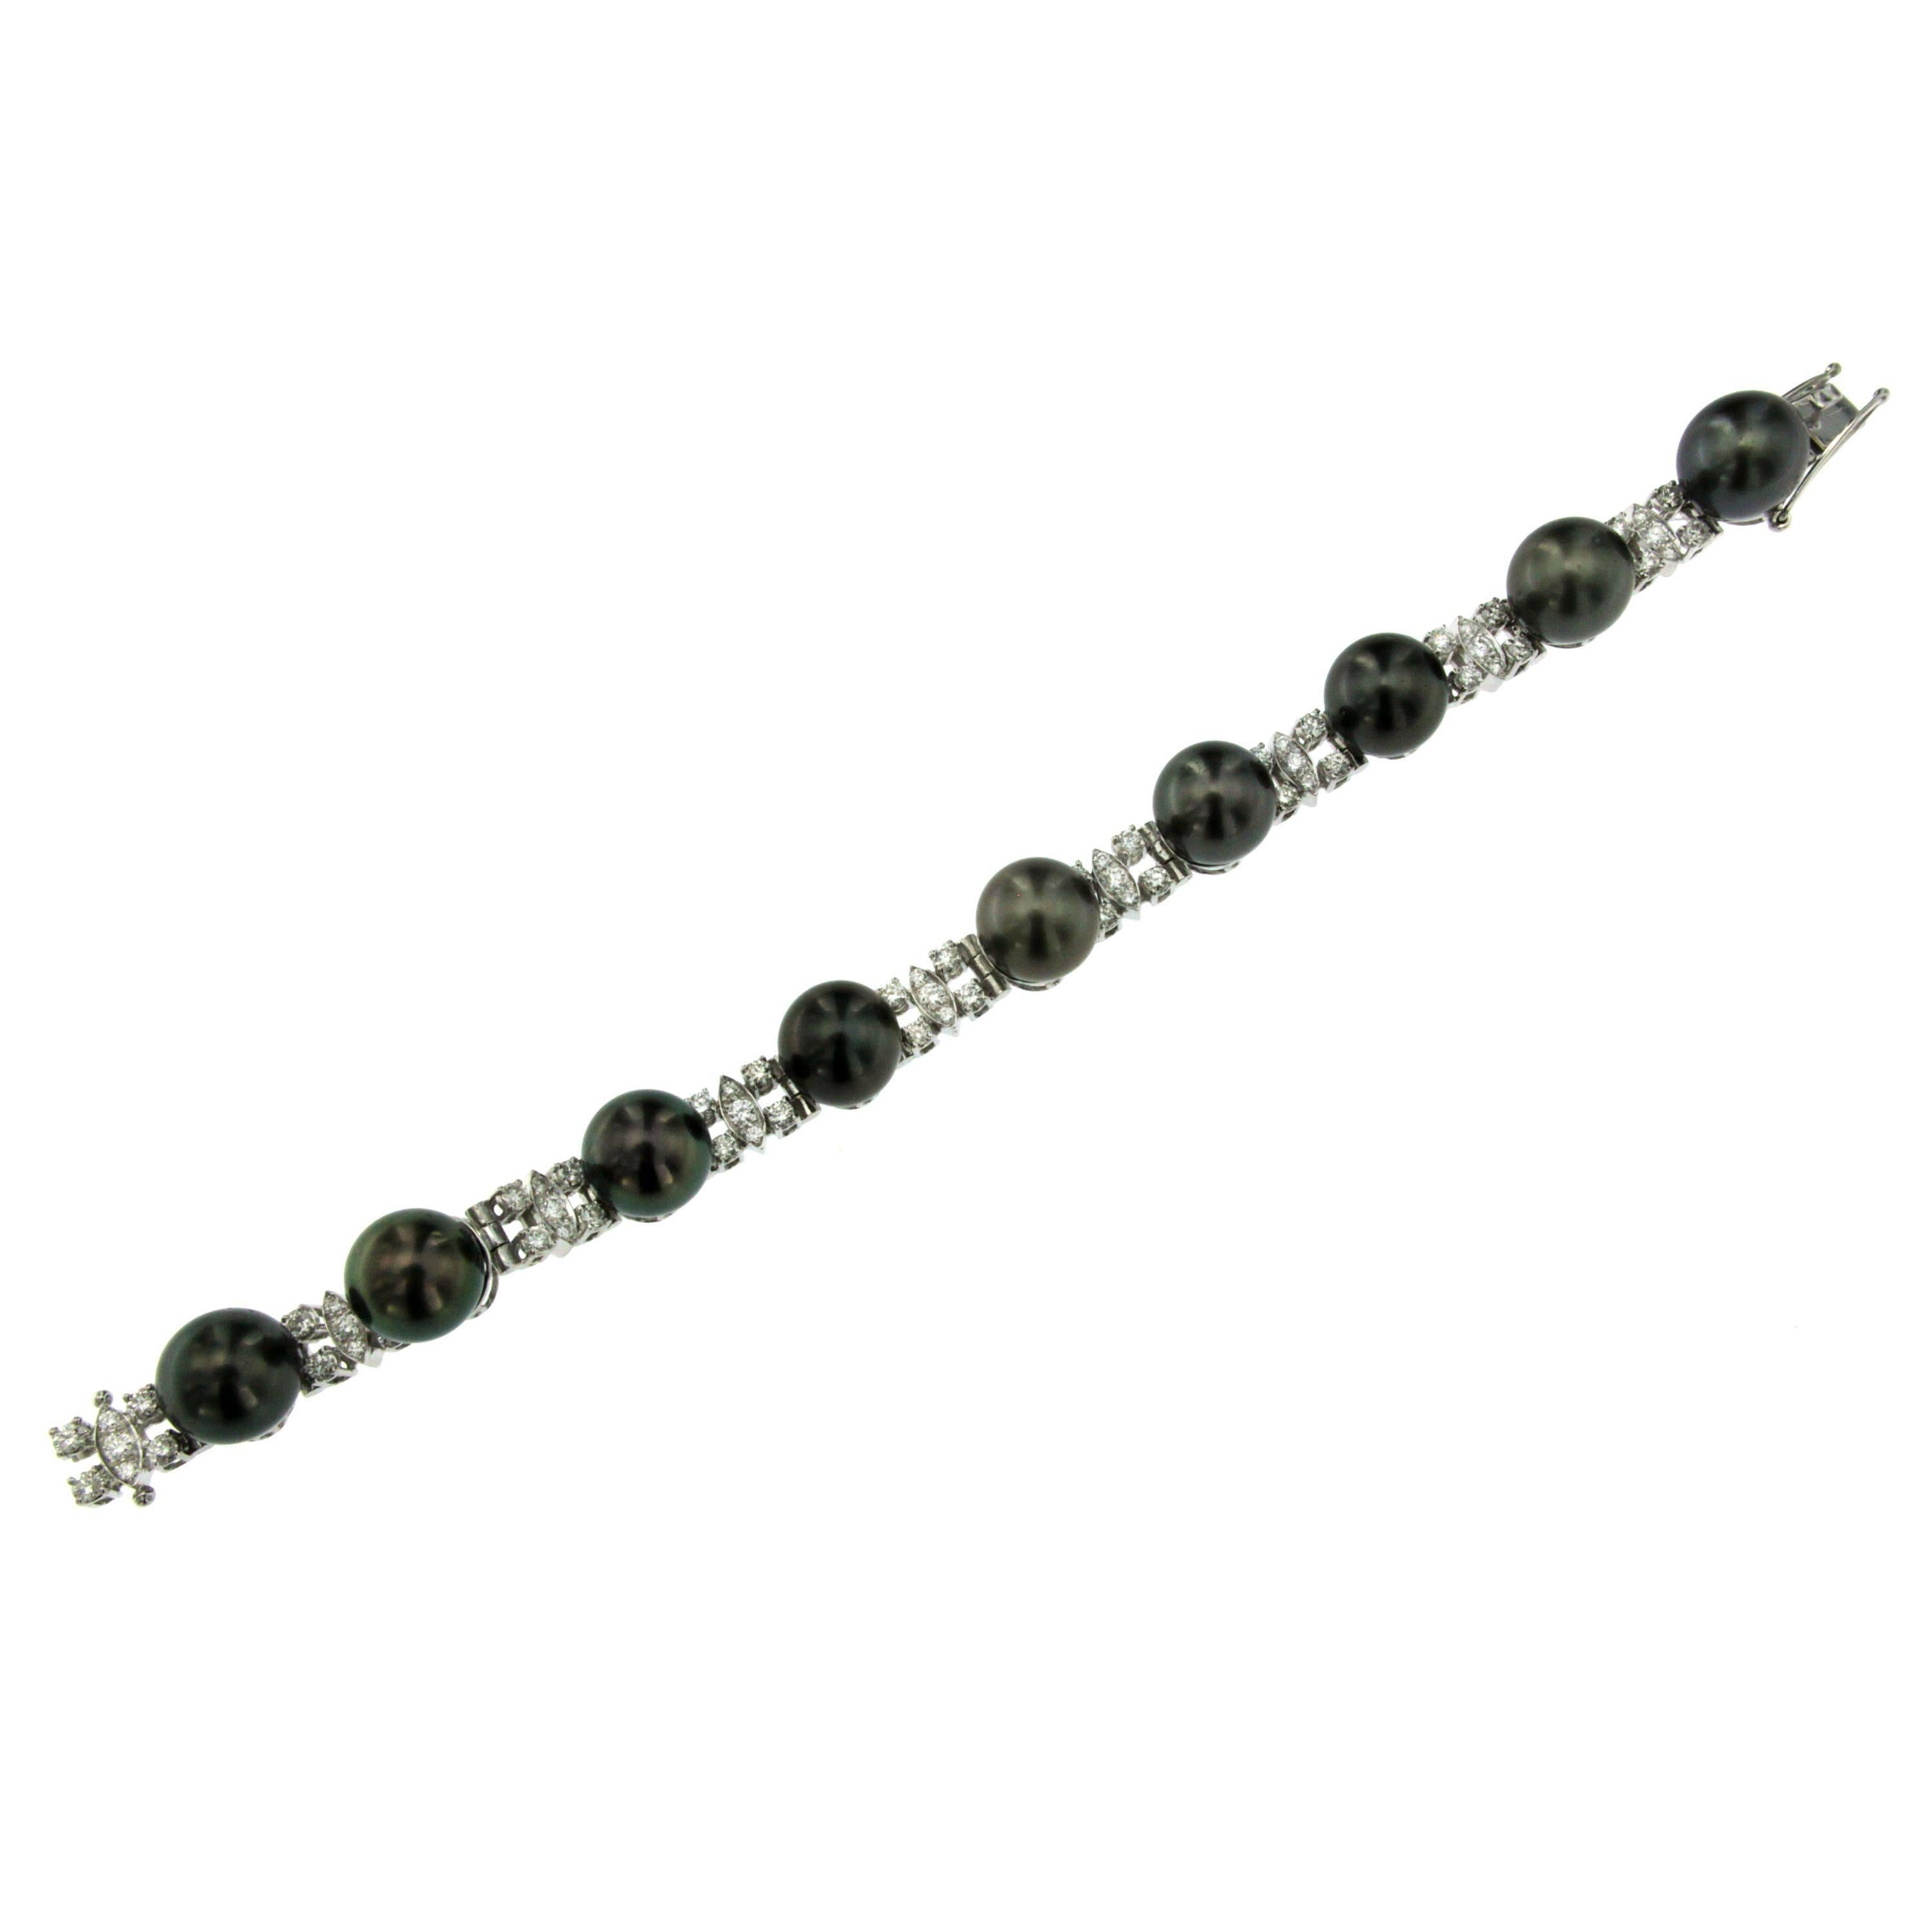 This Beautiful Bracelet is set with colorless round brilliant cut diamonds approx. 2.70 carats, alternating with Black Tahiti pearls 11mm .  Eye-catching and wonderfully crafted in 18k white gold. Circa 1980

CONDITION: Pre-Owned - Excellent
METAL: